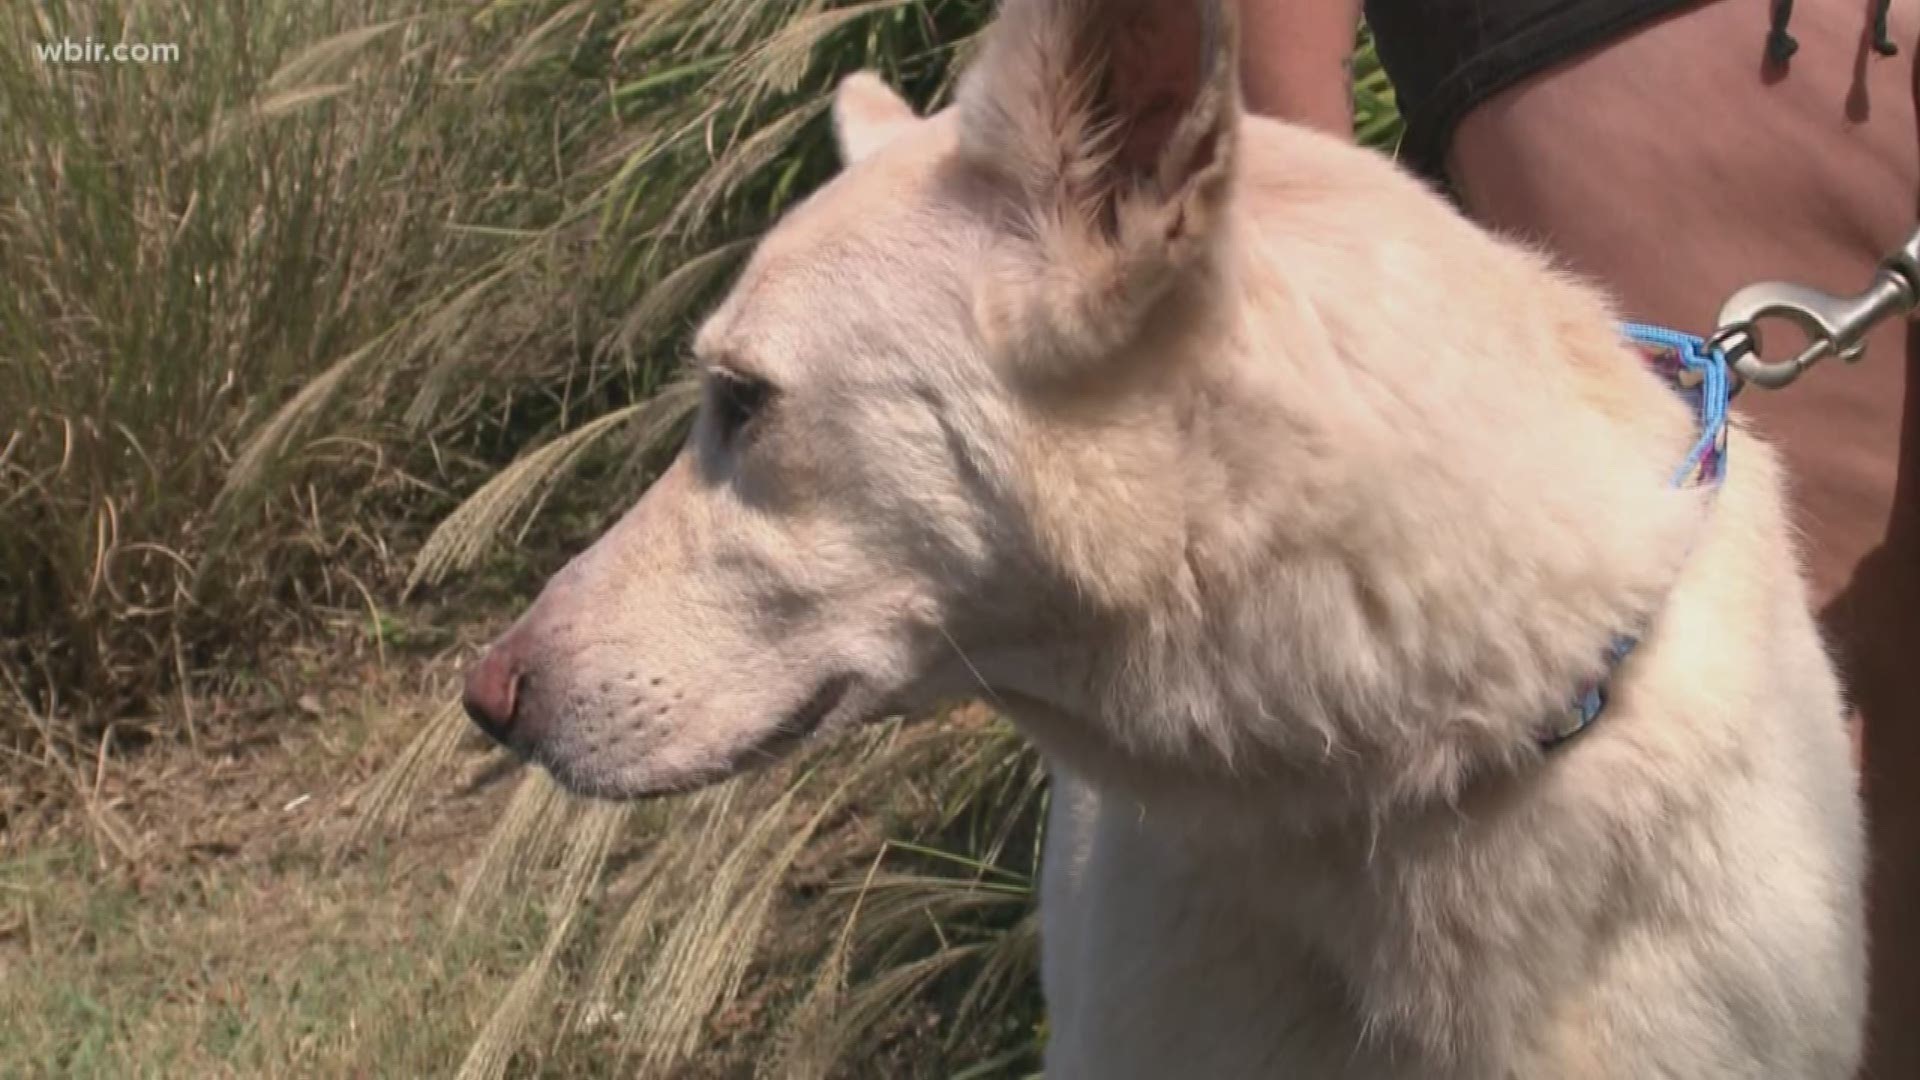 The owner says she's relieved to be reunited with her dog